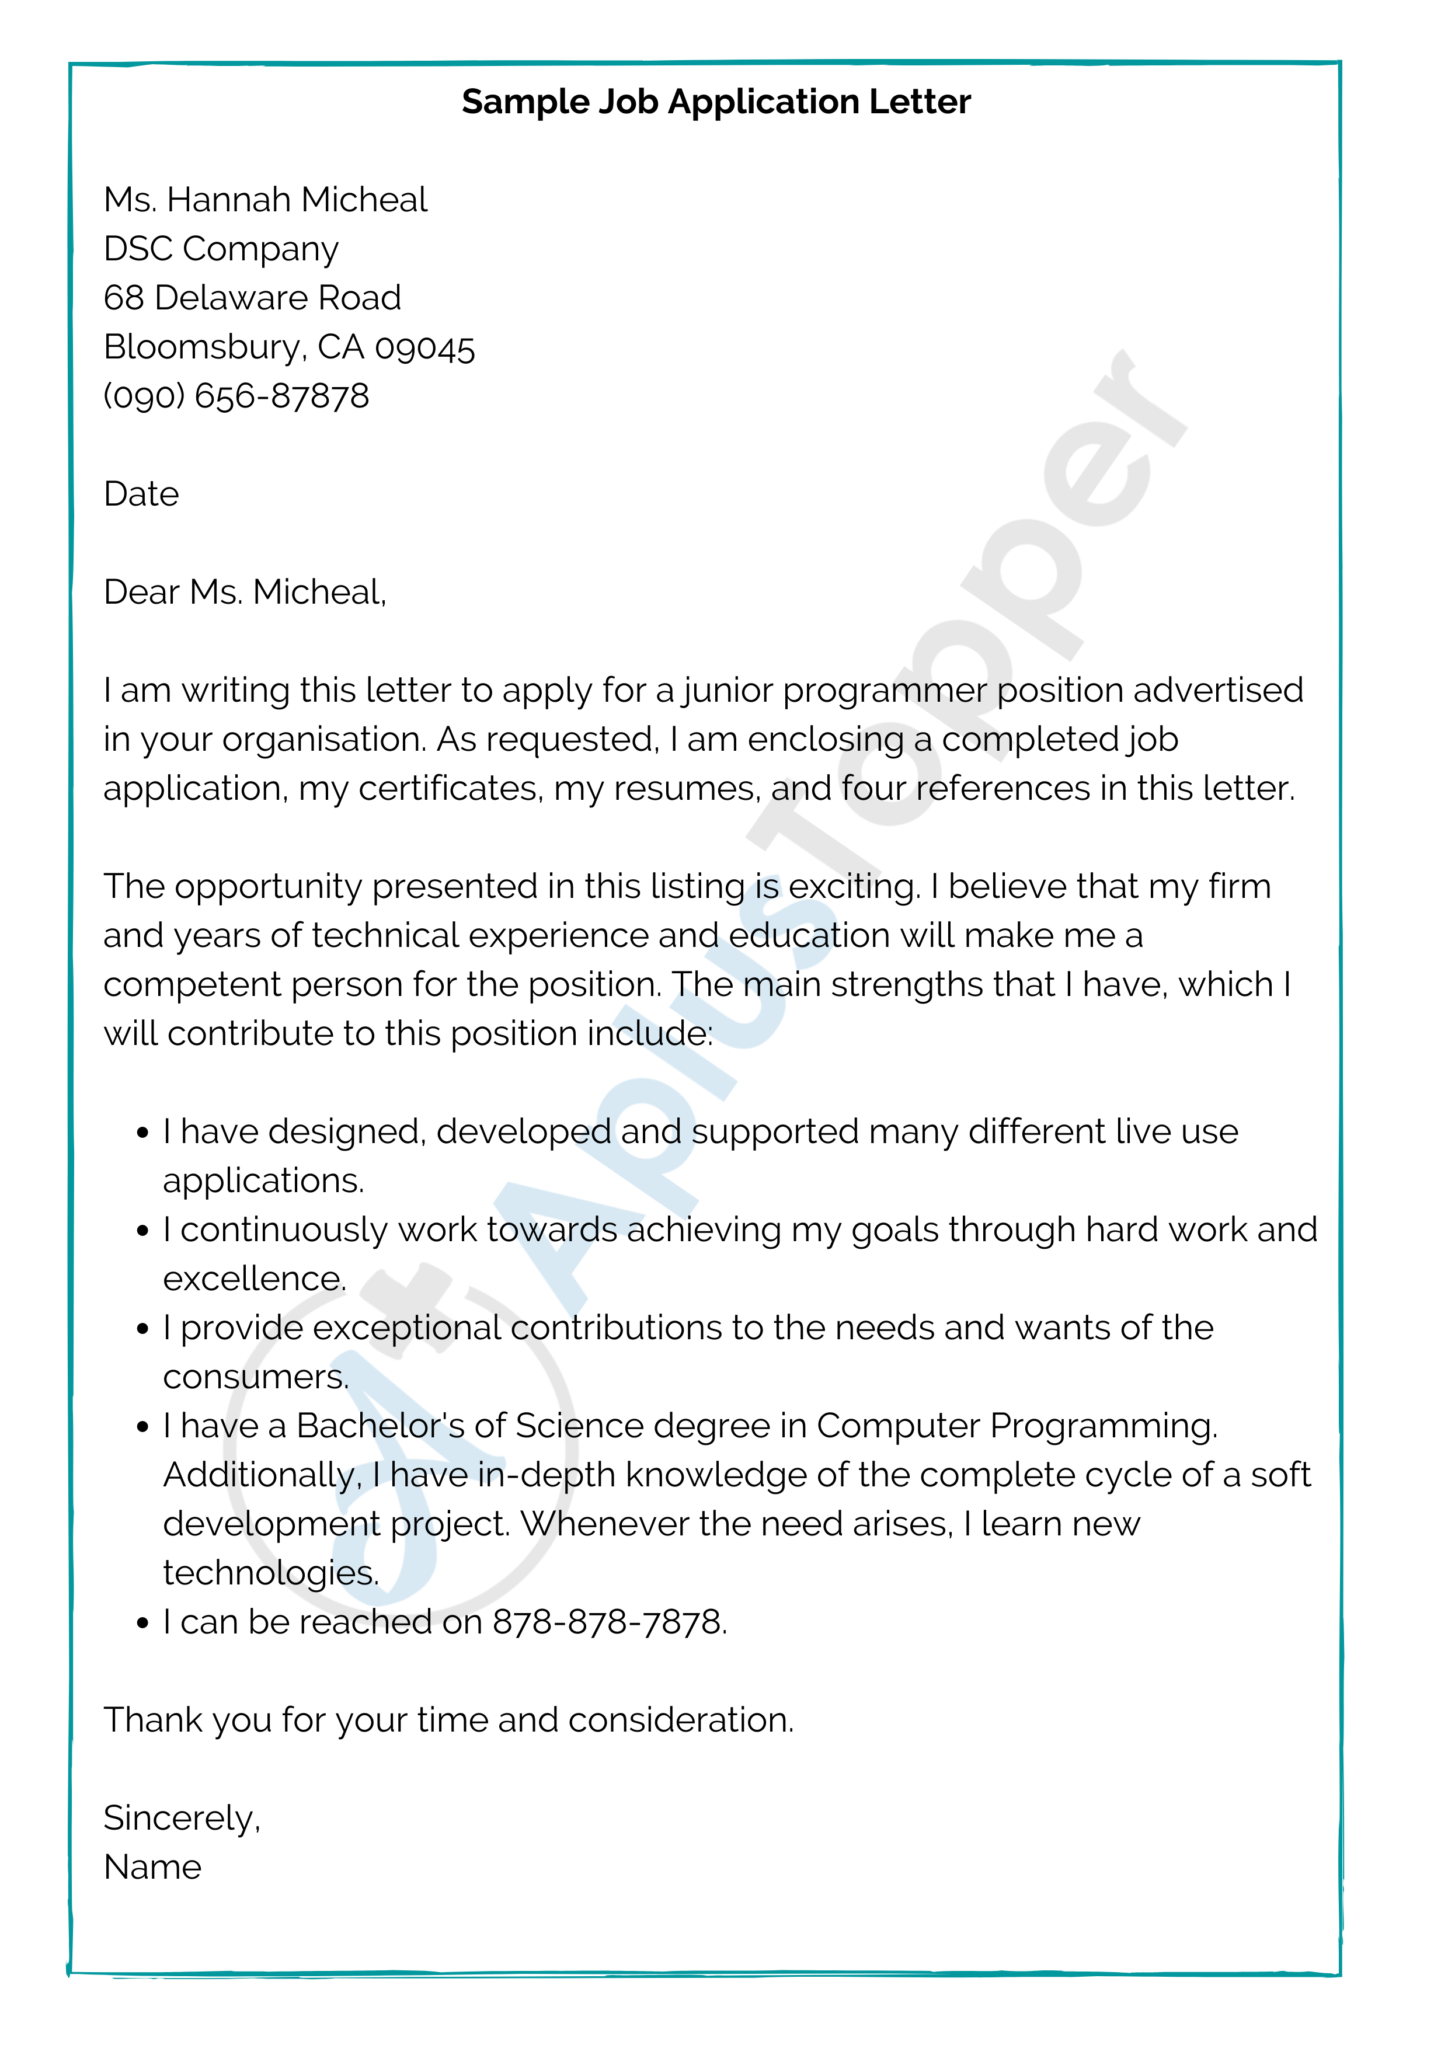 example of application letters for job vacancies